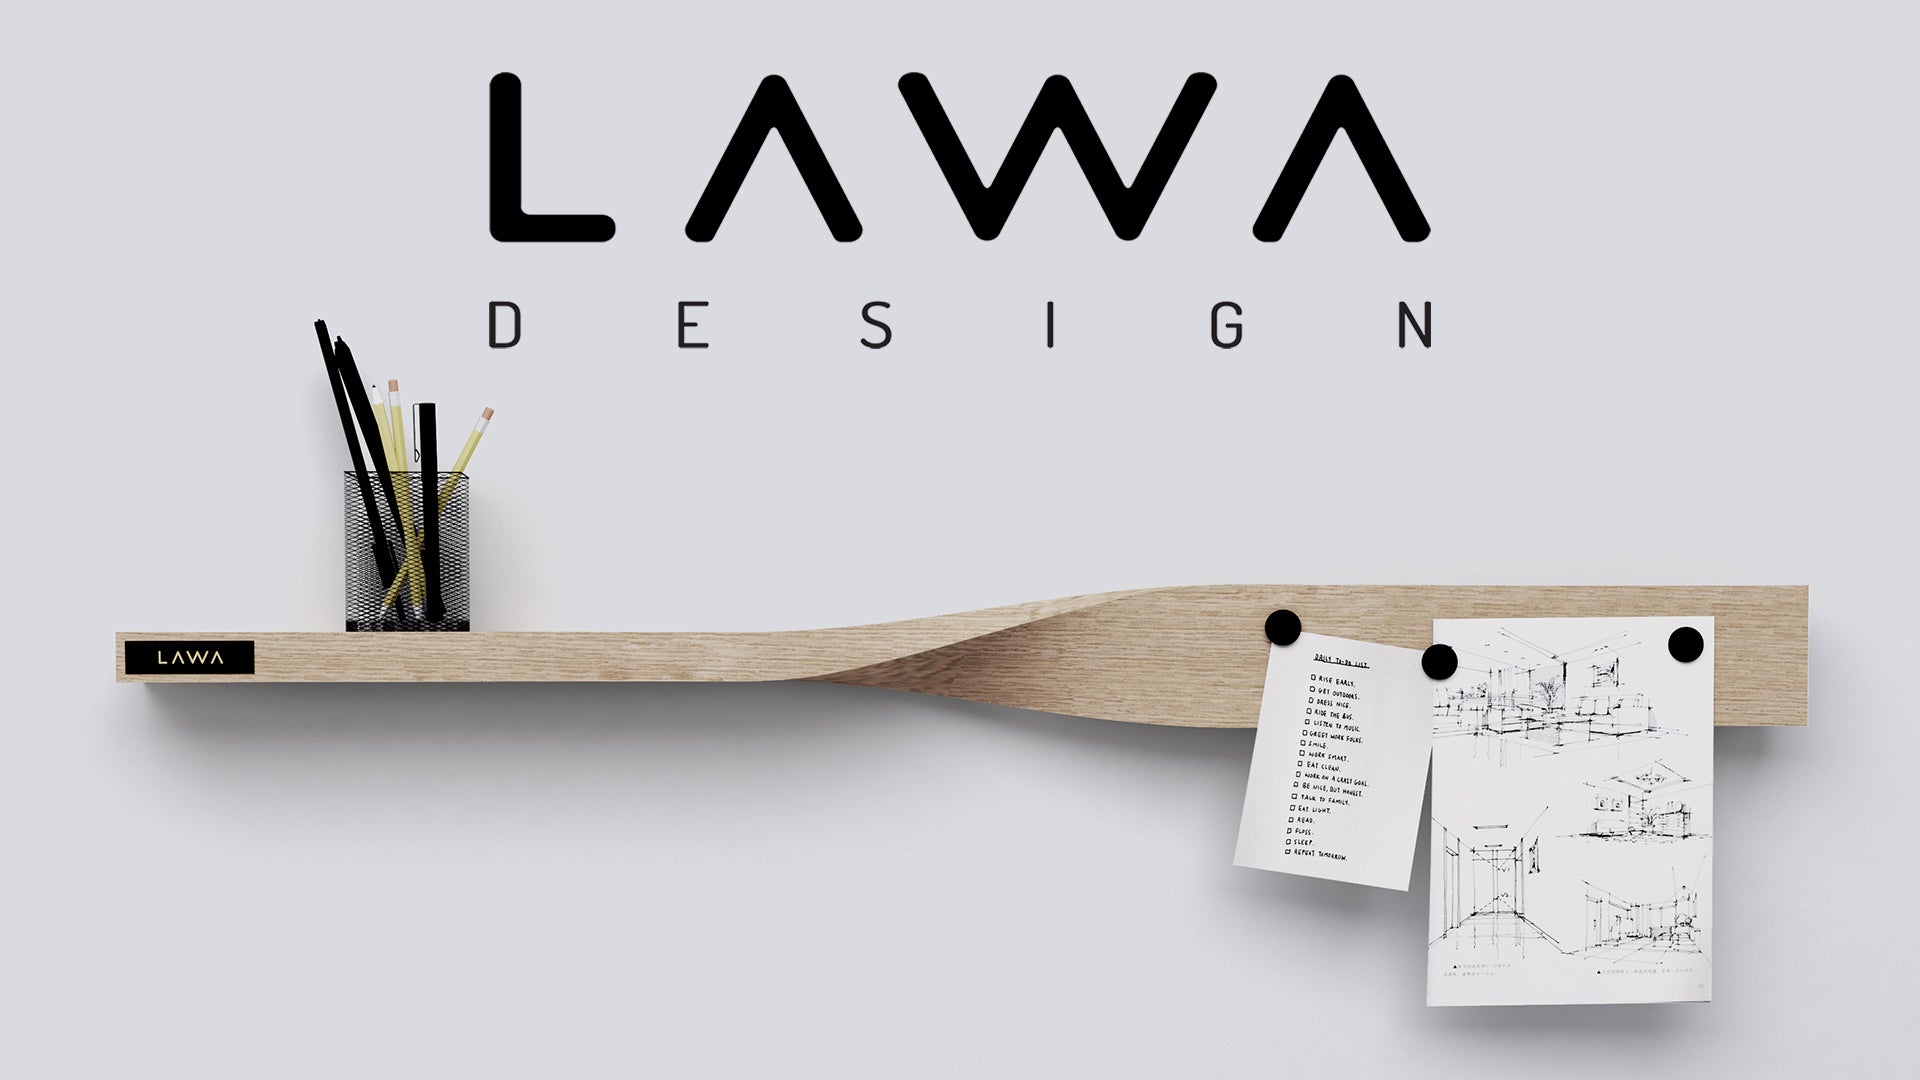 LAWA Design: Rules of architecture with a desire to experiment